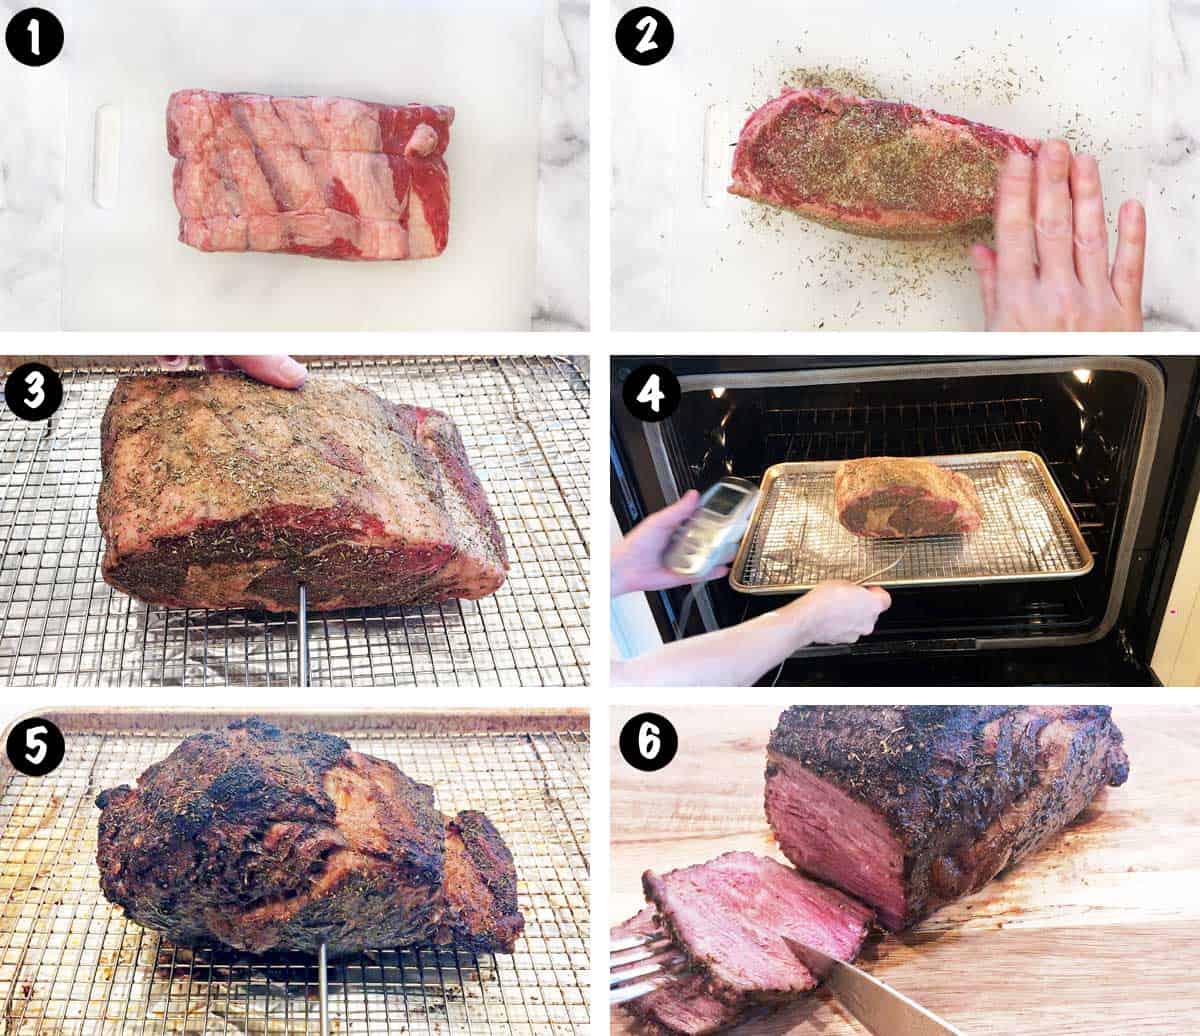 A photo collage showing the steps for cooking a ribeye roast. 